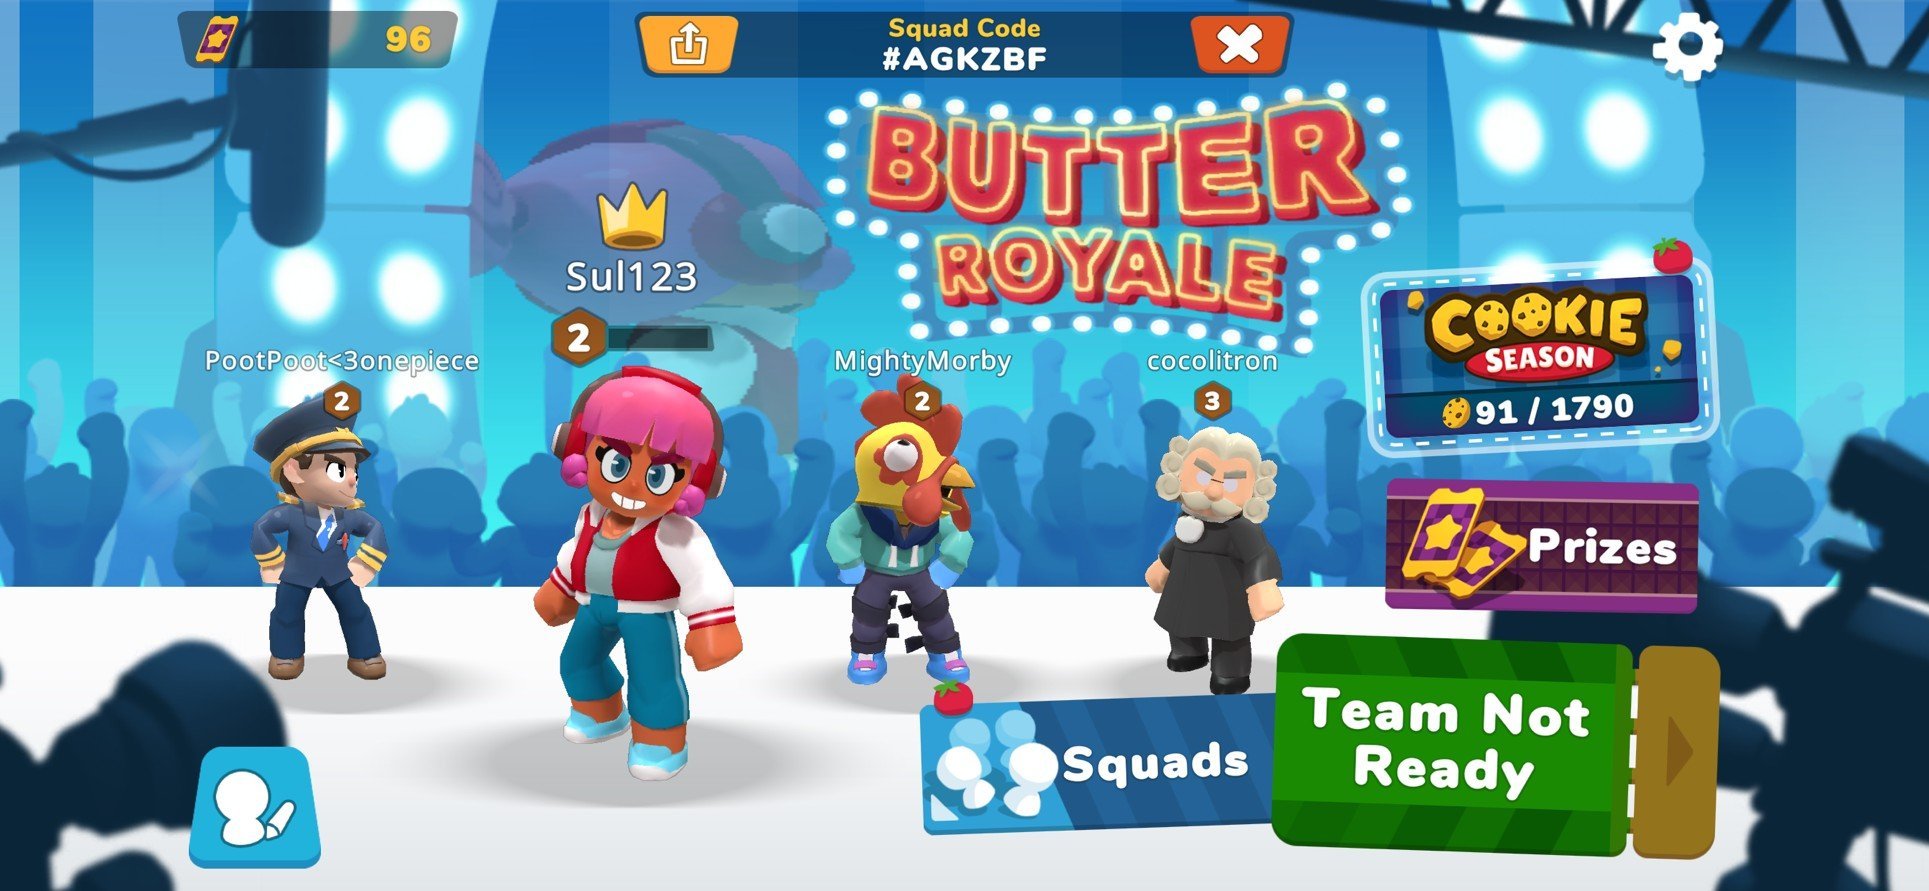 Butter Royale 4